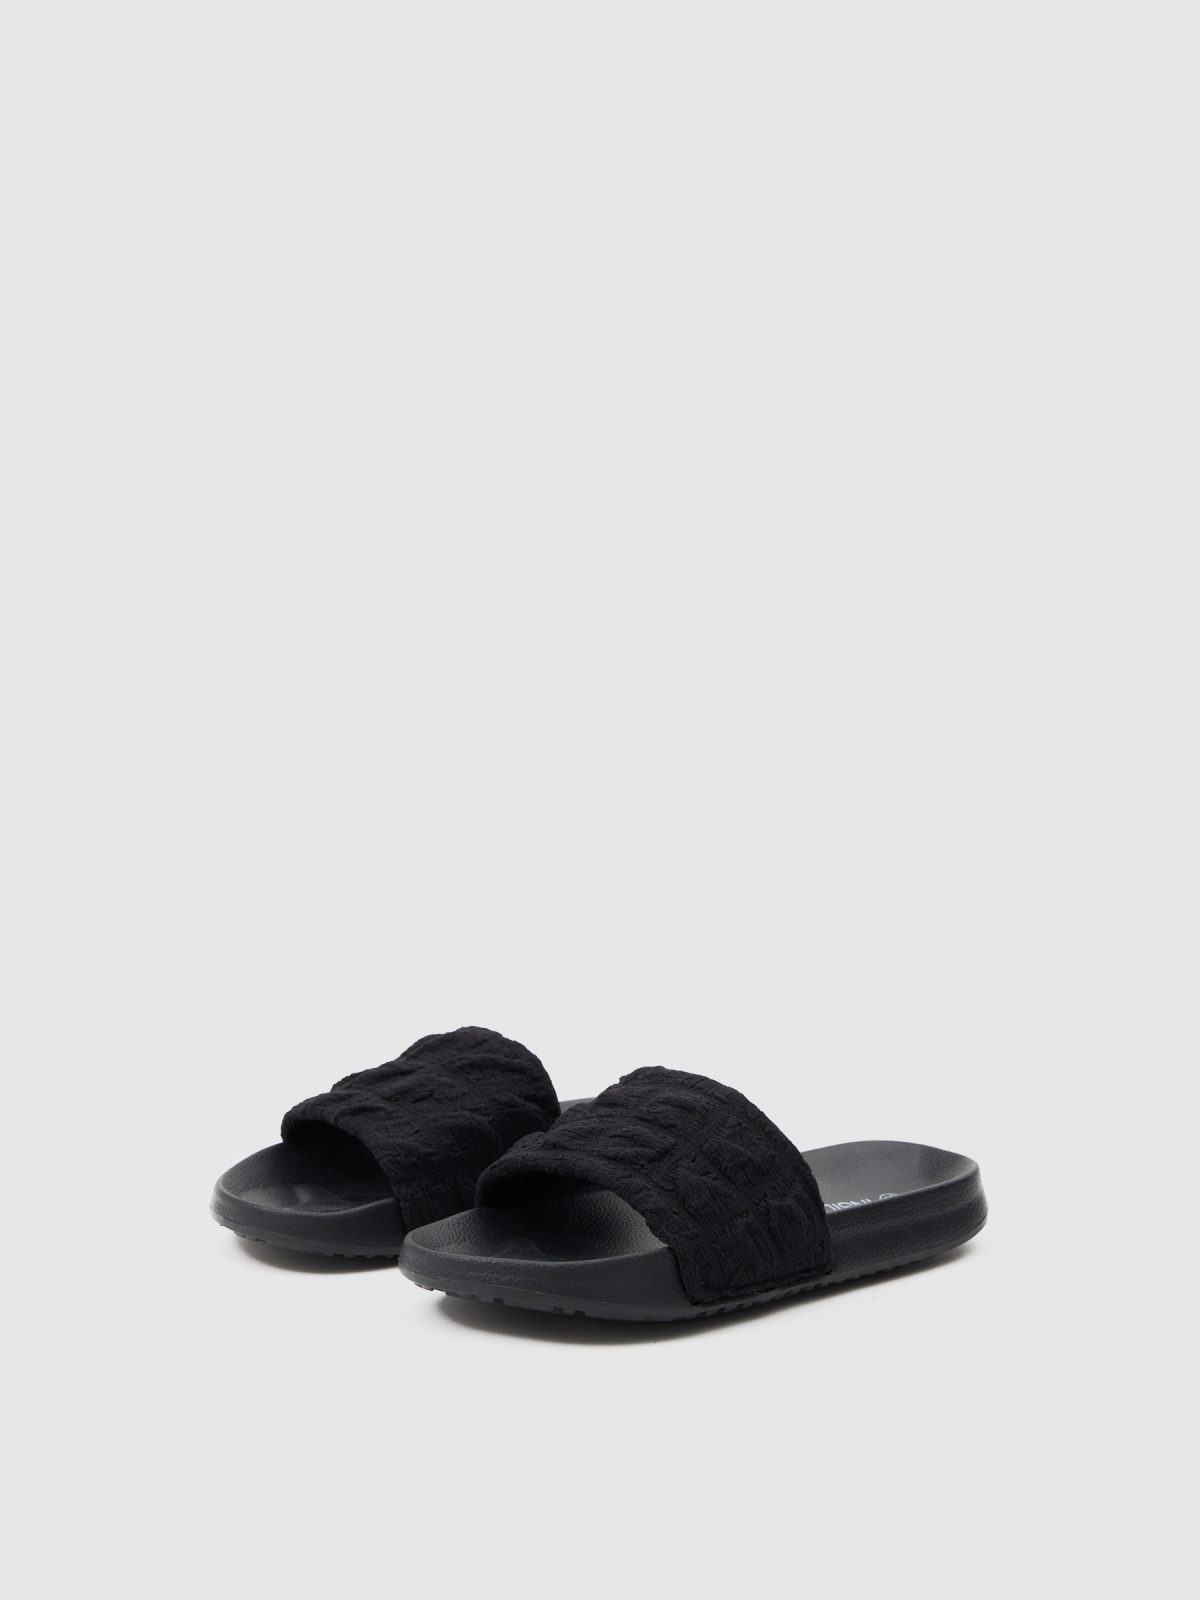 Shiny flip flops black lateral view